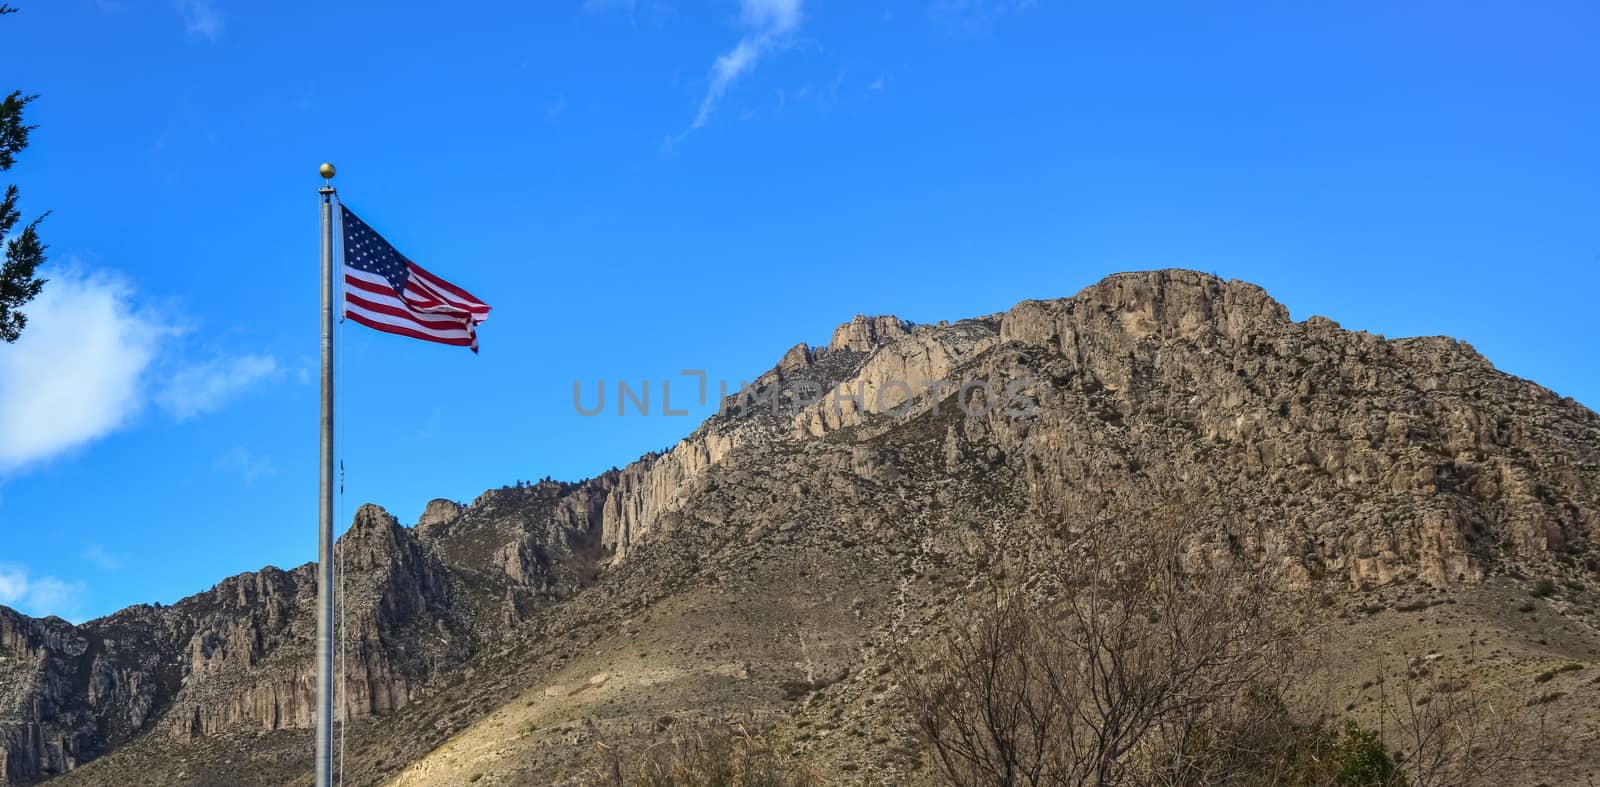 American flag against a blue sky in the territory of a visit center in a park in New Mexico by Hydrobiolog